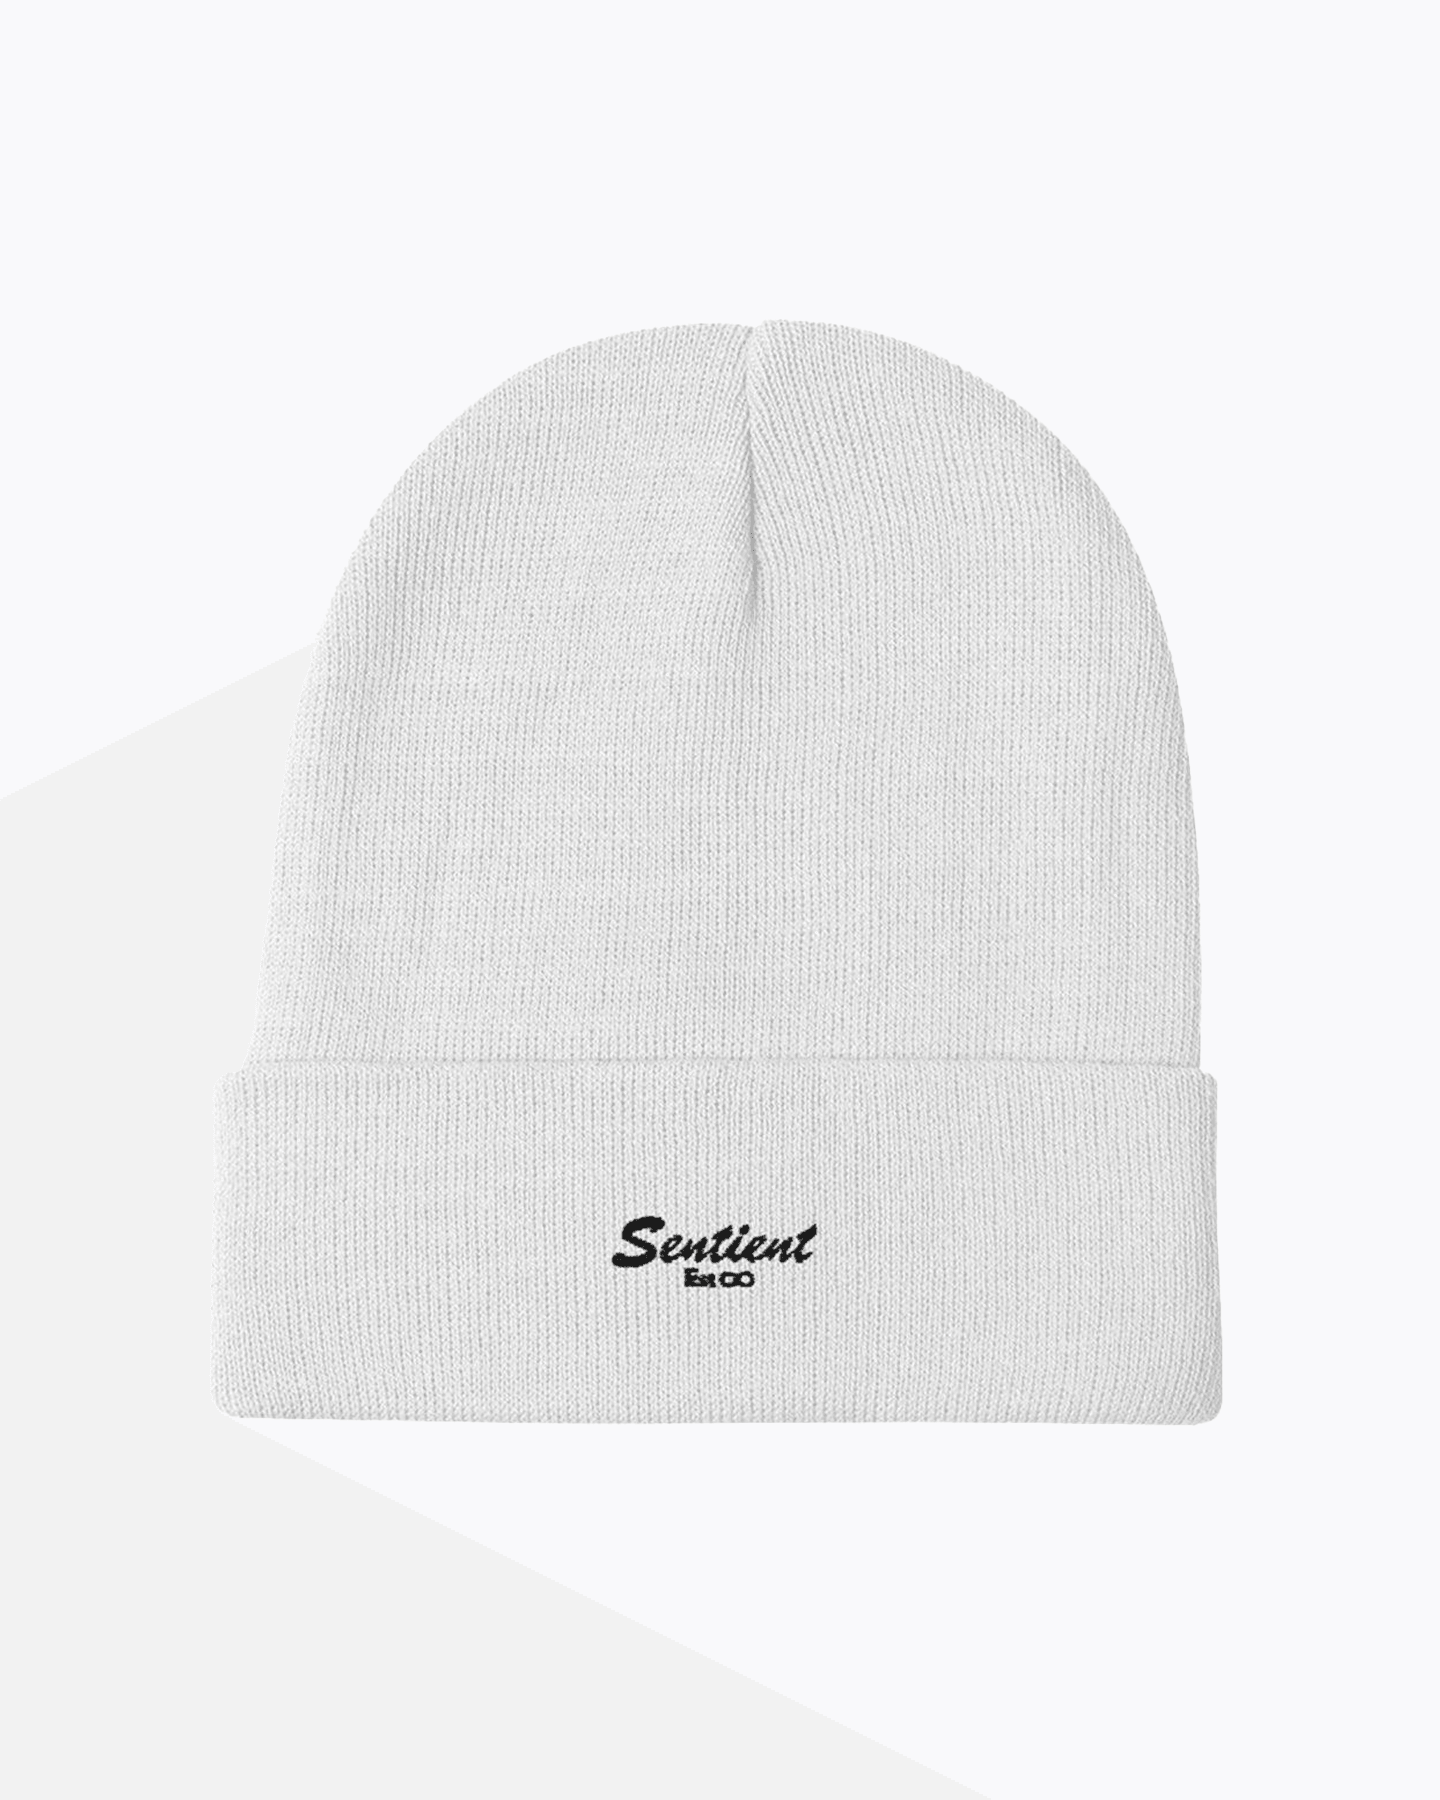 Embroidered est infinity Beanie - Sentient Official